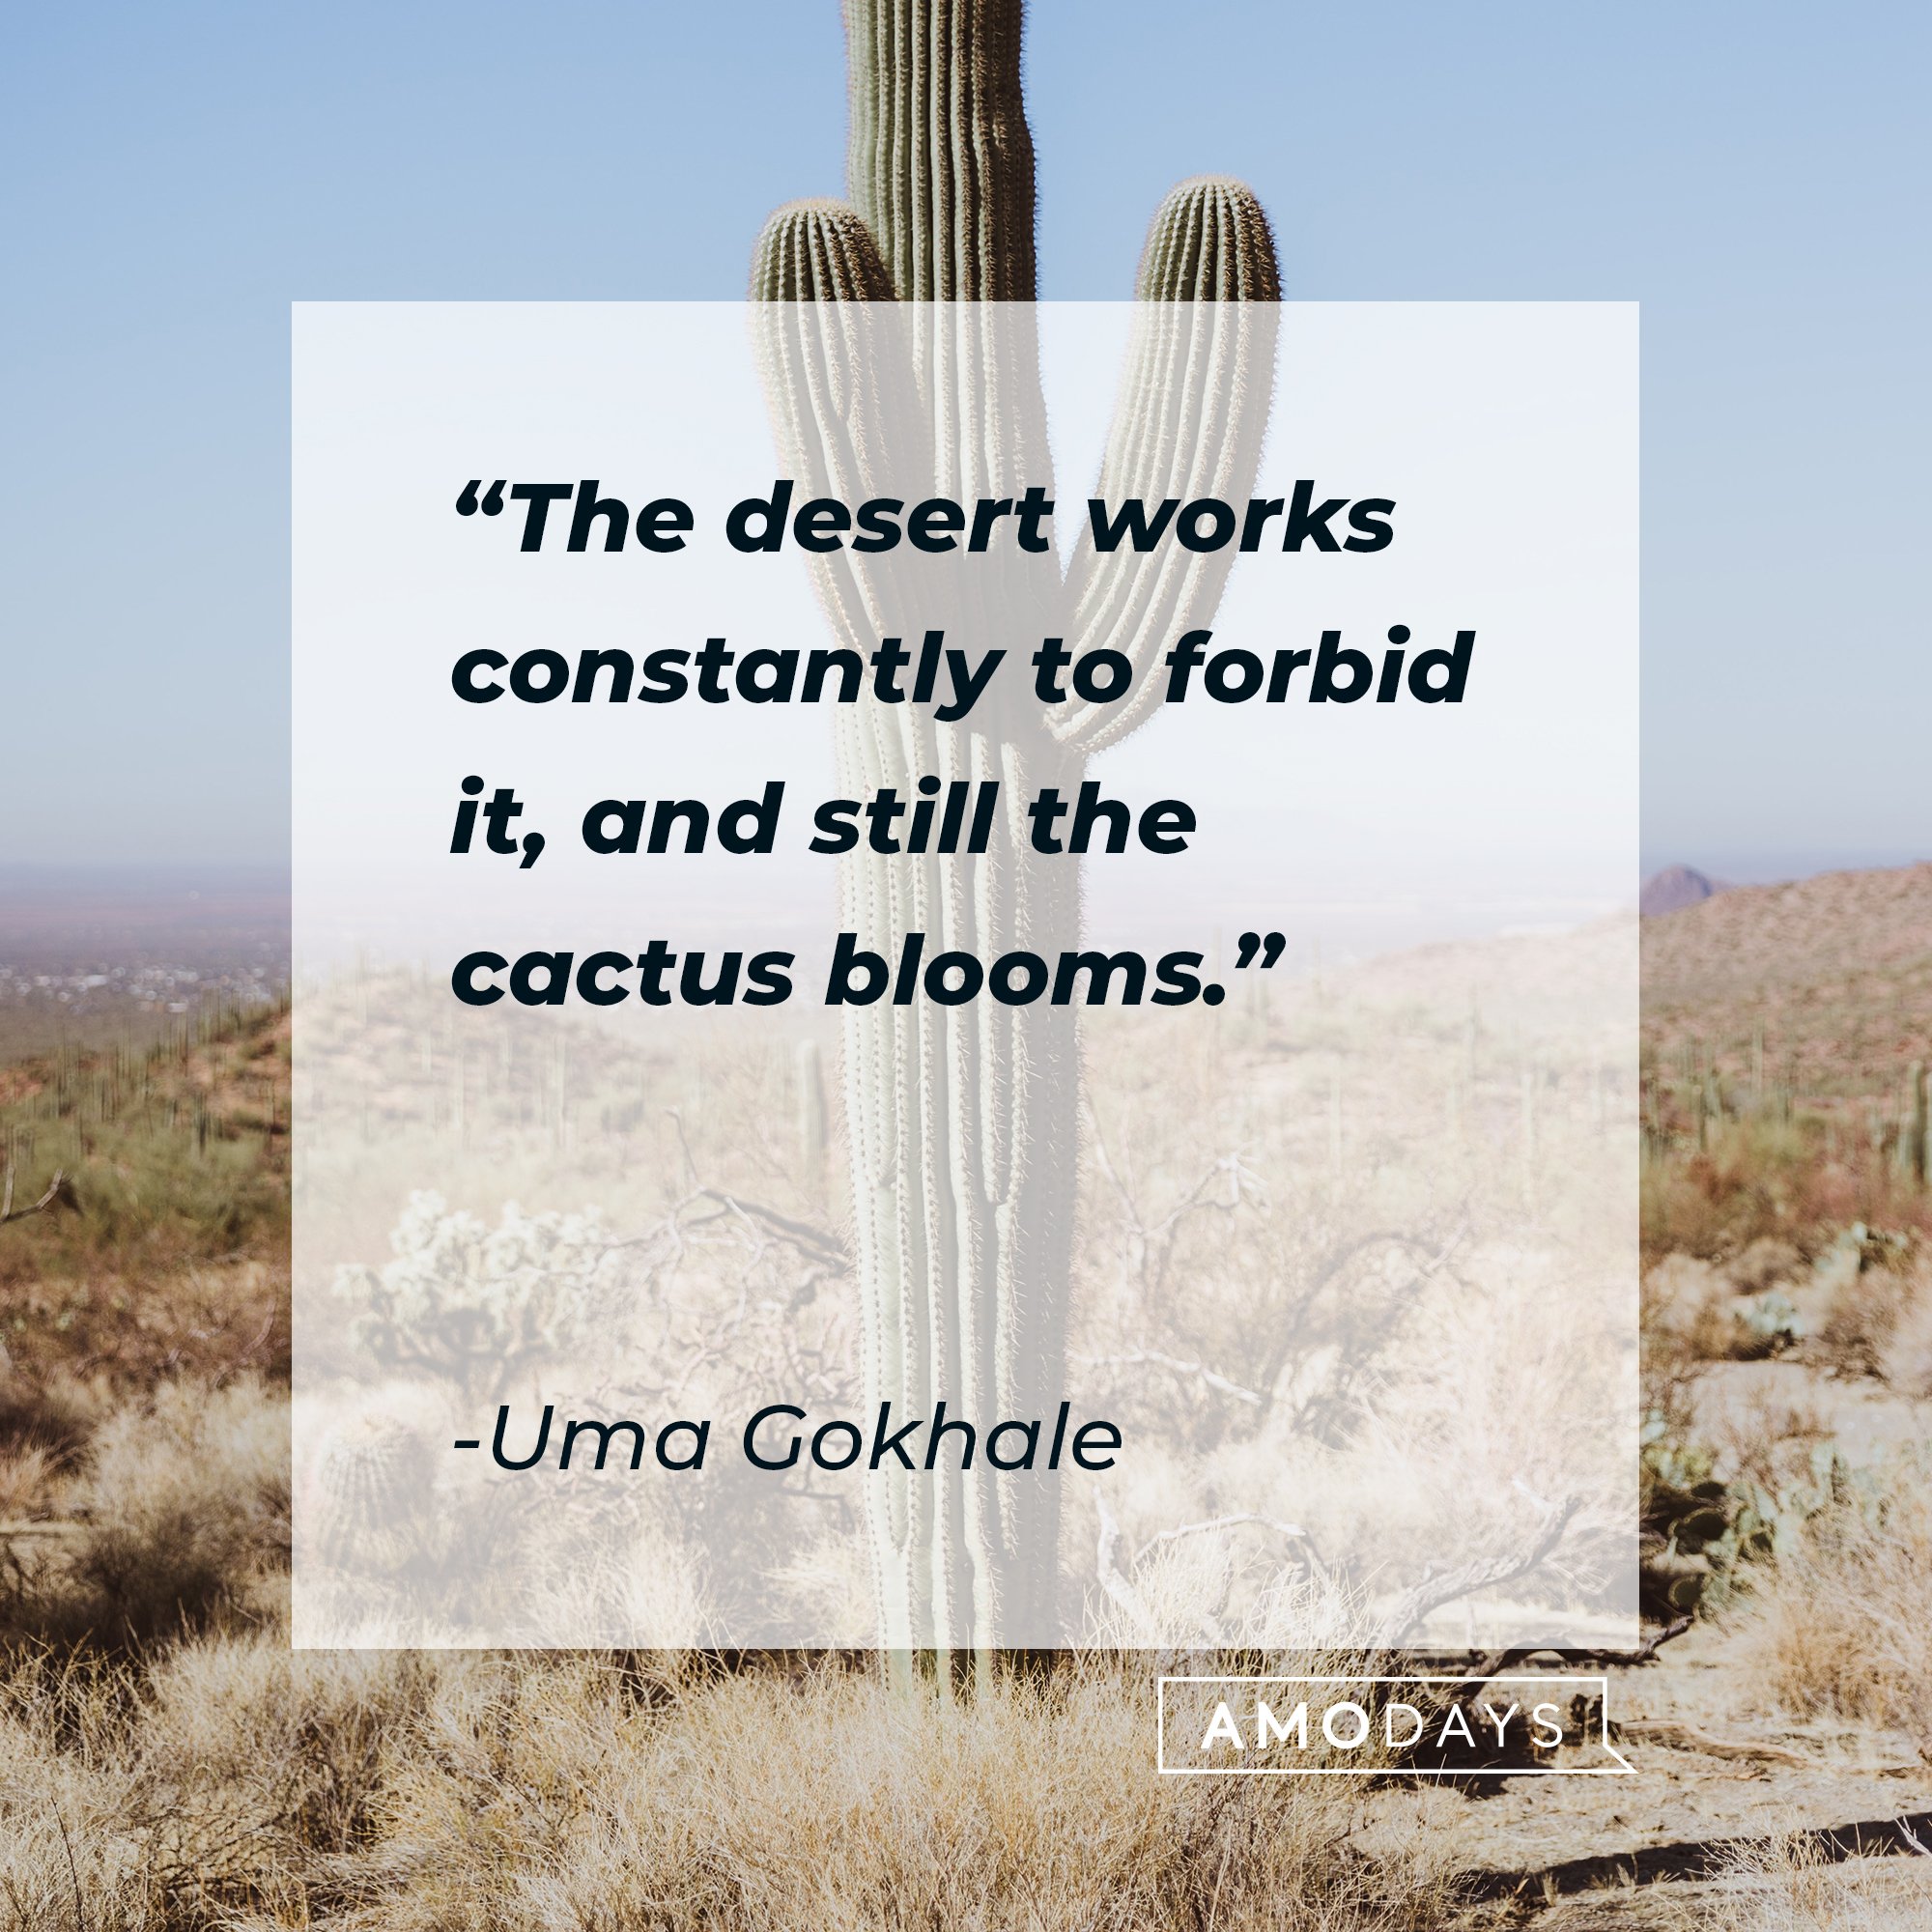  Uma Gokhale’s quote: "The desert works constantly to forbid it, and still the cactus blooms."  | Image: AmoDays